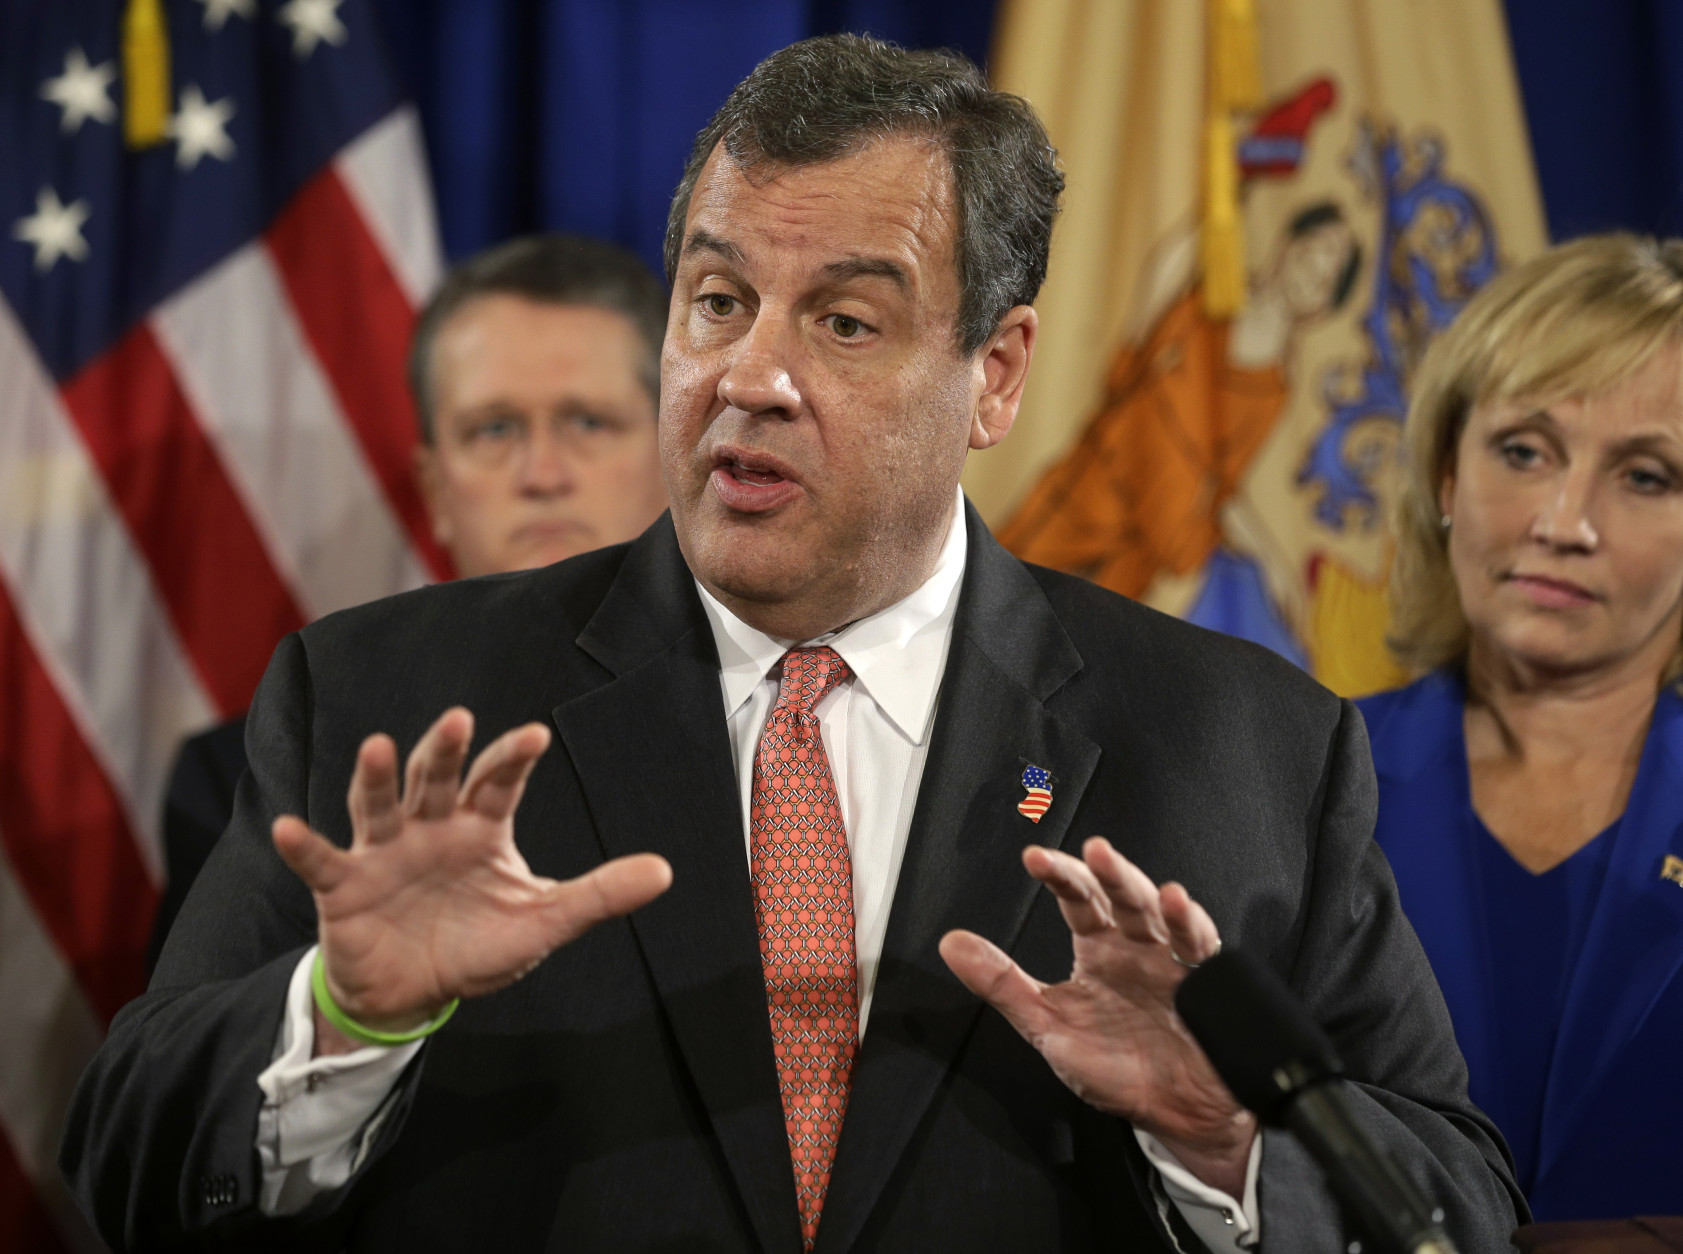 New Jersey Gov. Chris Christie addresses a gathering to lay out preparation plans for a possible weekend rainstorm Thursday, Oct. 1, 2015, in Trenton, N.J.  Governors up and down the East Coast are warning residents to prepare for drenching storms as flooding killed one person Thursday in South Carolina. The rains could cause power outages and close roads in a region already walloped by rain. Hurricane Joaquin's approach could intensify the damage, but rain is forecast across the region regardless of the storm's path. Listening in the background are John Hoffman, left, acting Attorney General of the State of New Jersey, and Lt. Gov. Kim Guadagno. (AP Photo/Mel Evans)